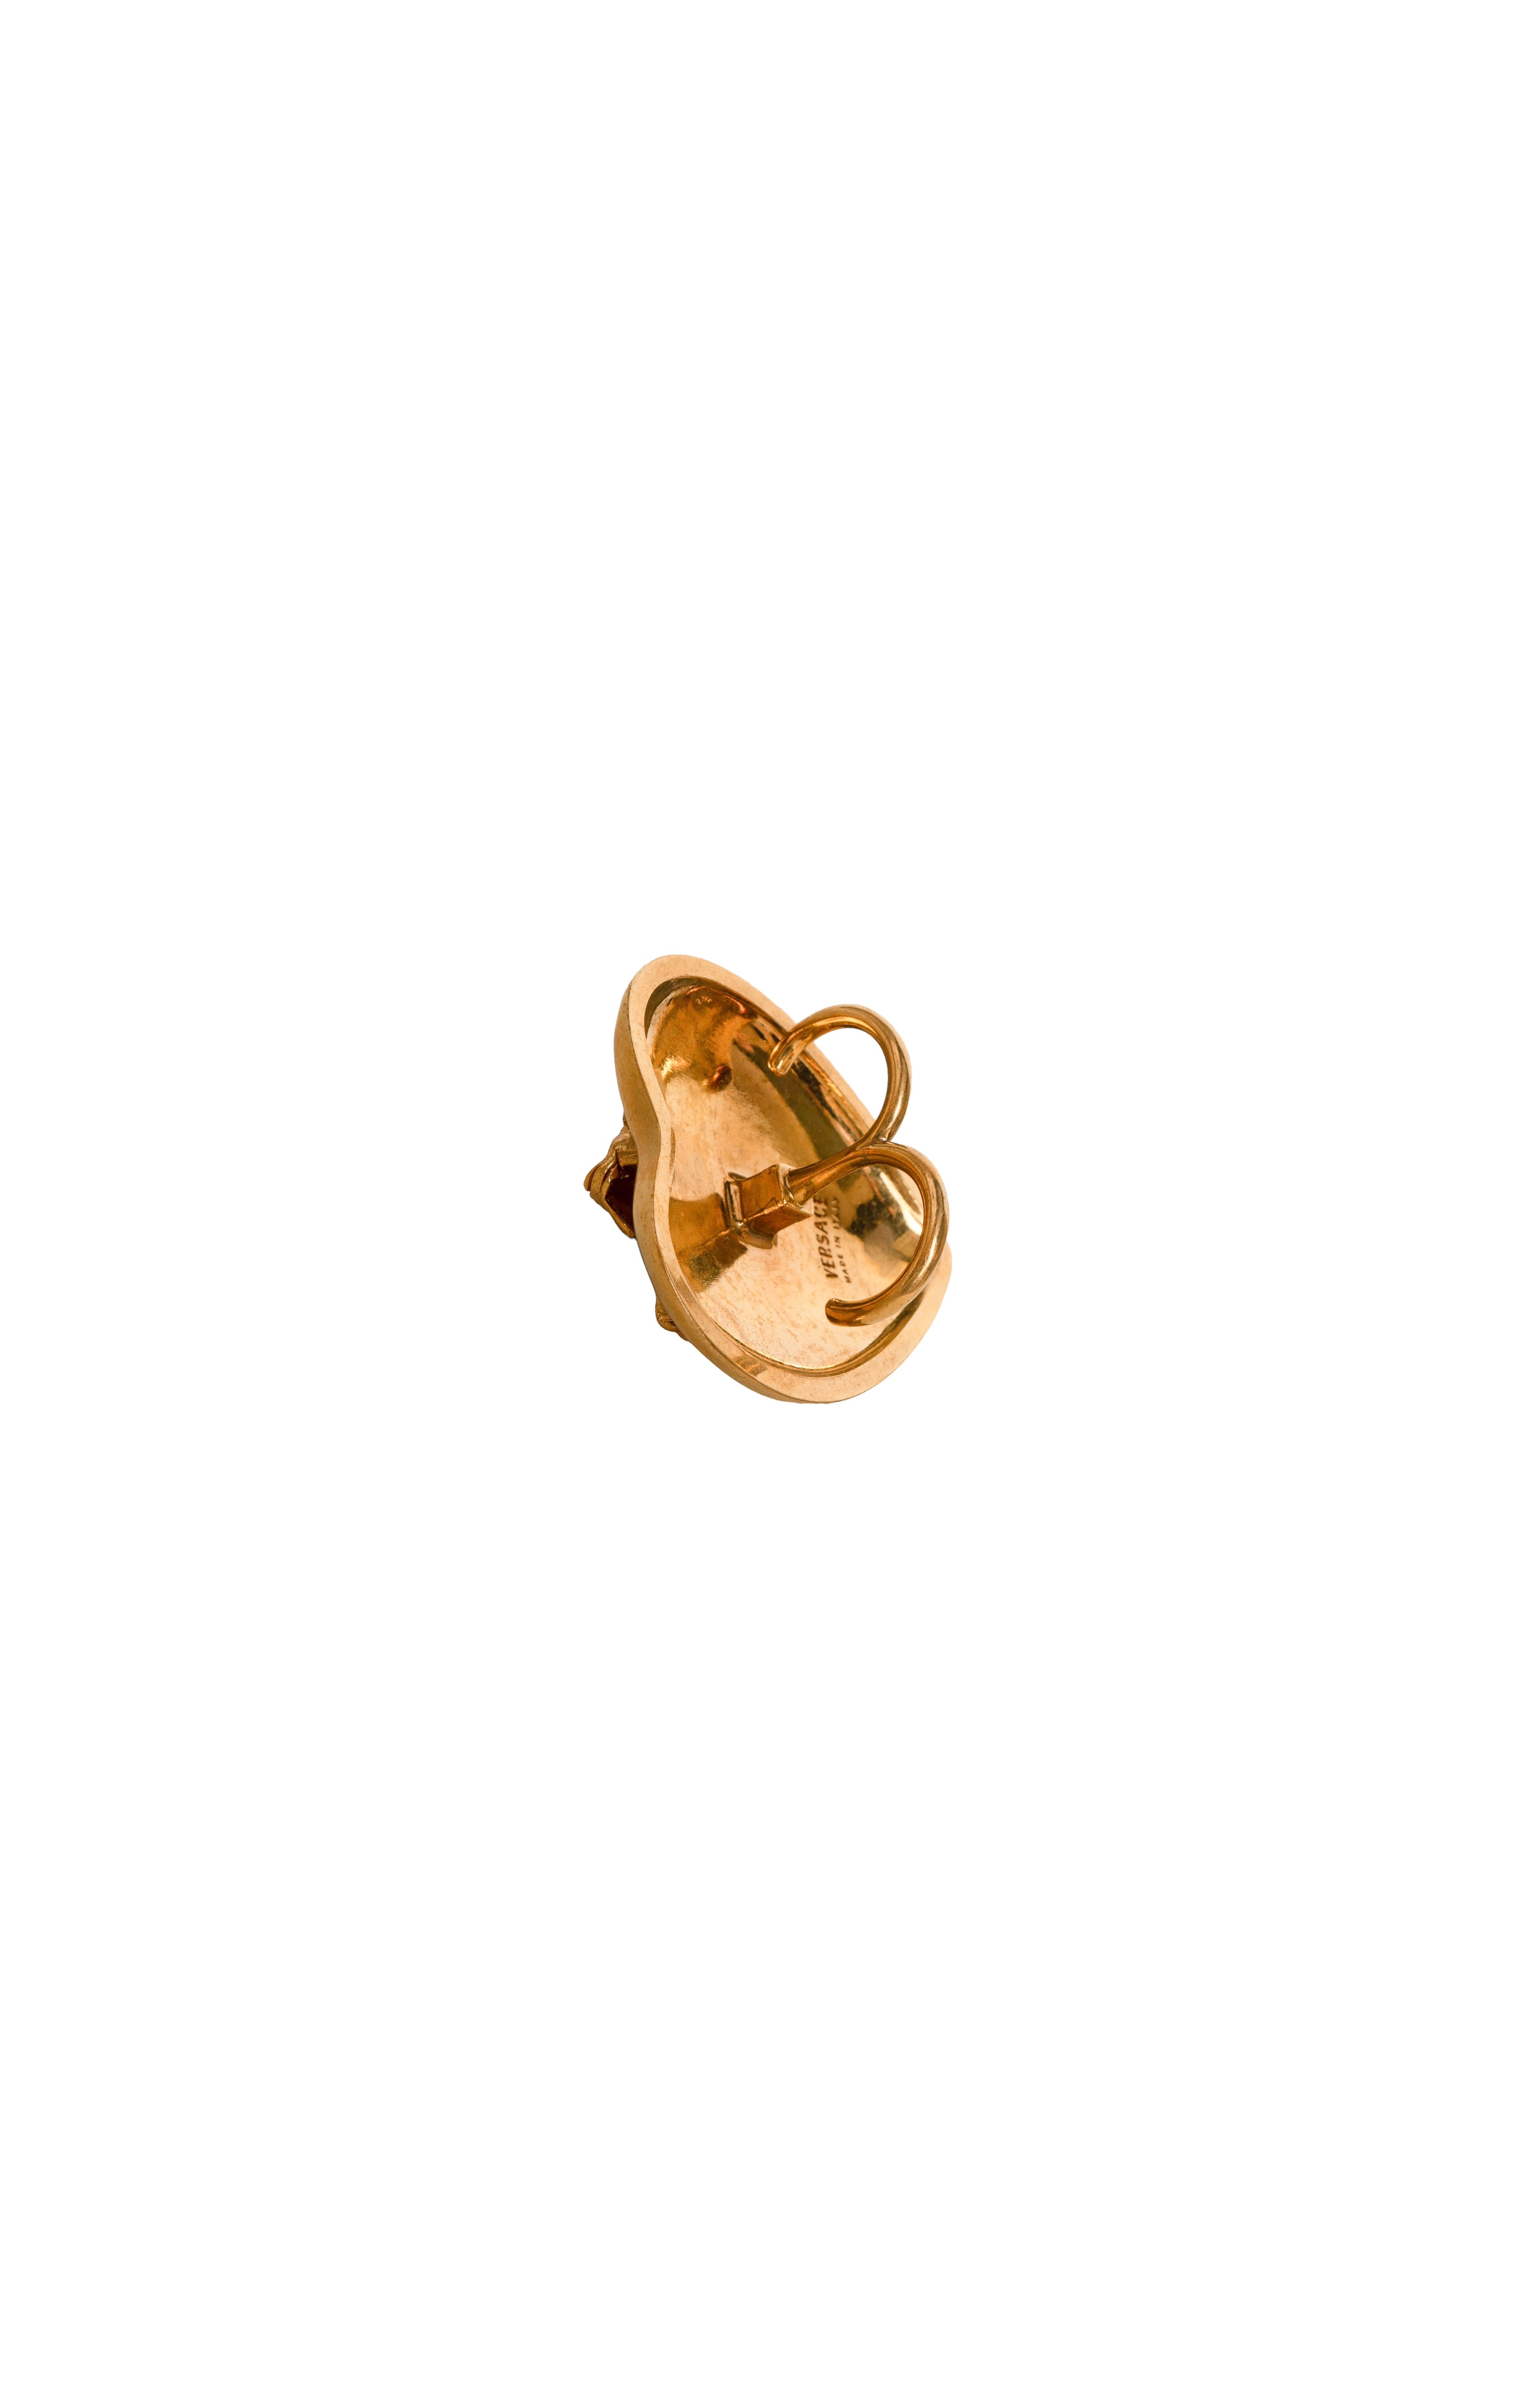 VERSACE (RARE) Ring Size: 2.375" x 2"